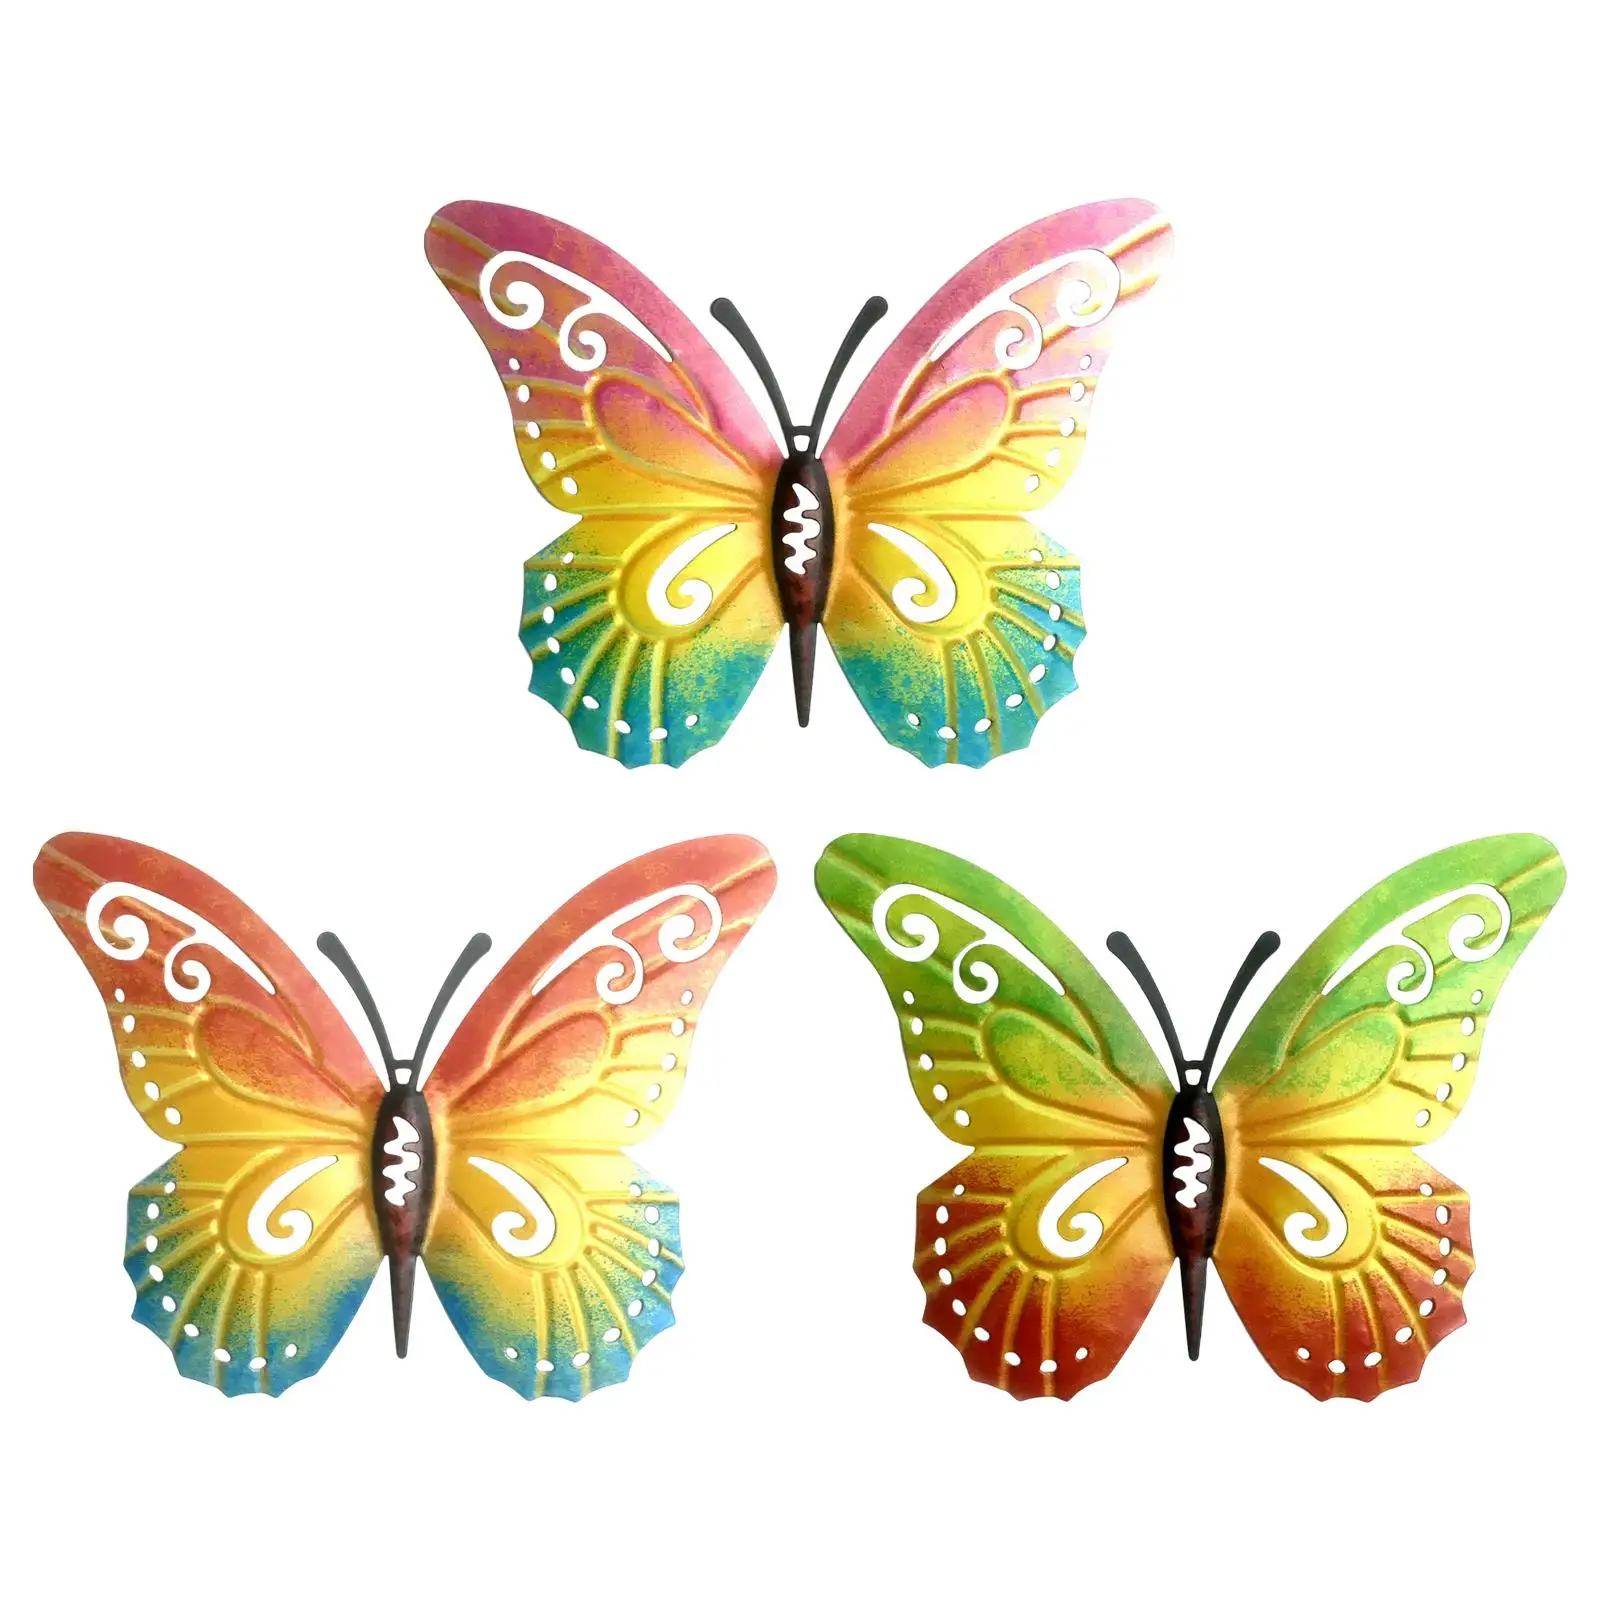 Butterfly Wall Decors Hanging Sculptures Wall Art Decor Collectible Figurines for Flowerbed Patio Backyard Lawn Porch